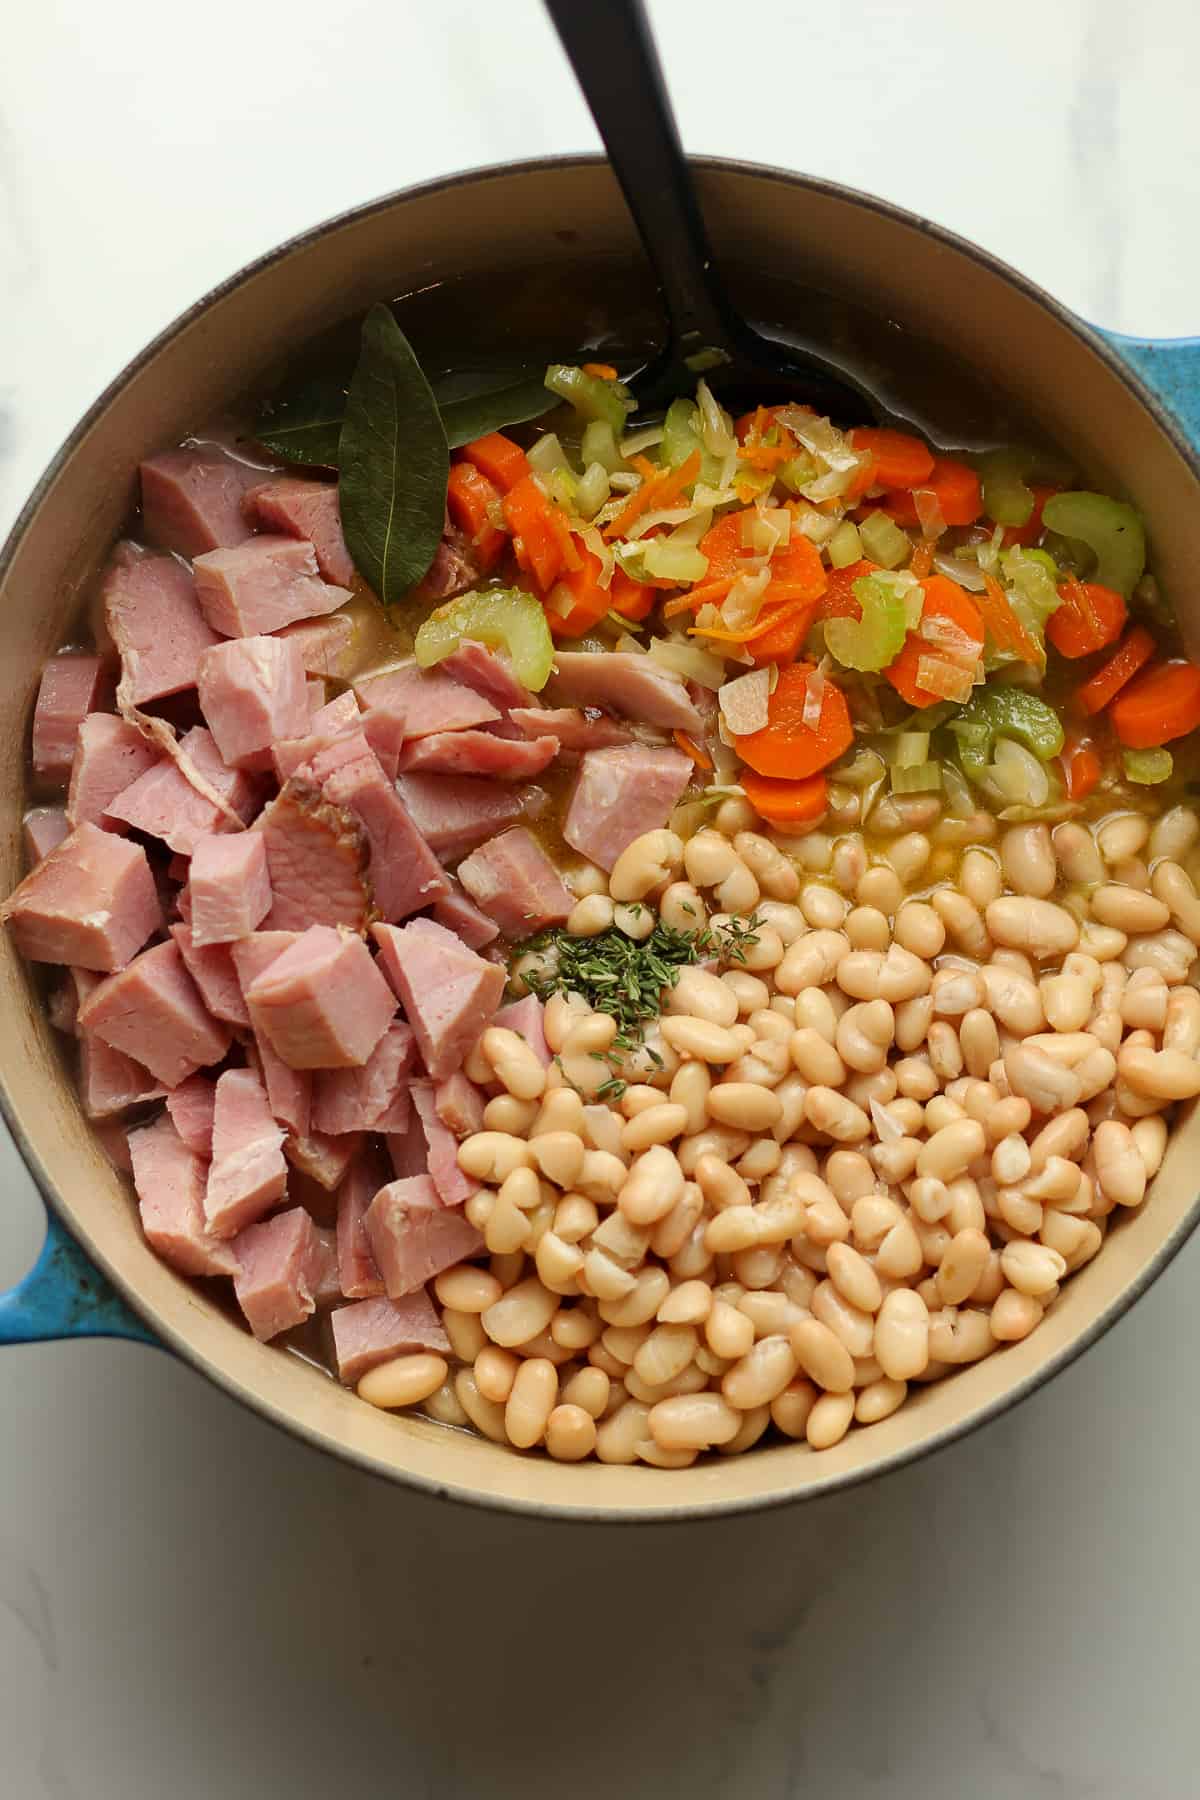 A pot of the soup after adding in the ham, beans, and veggies.